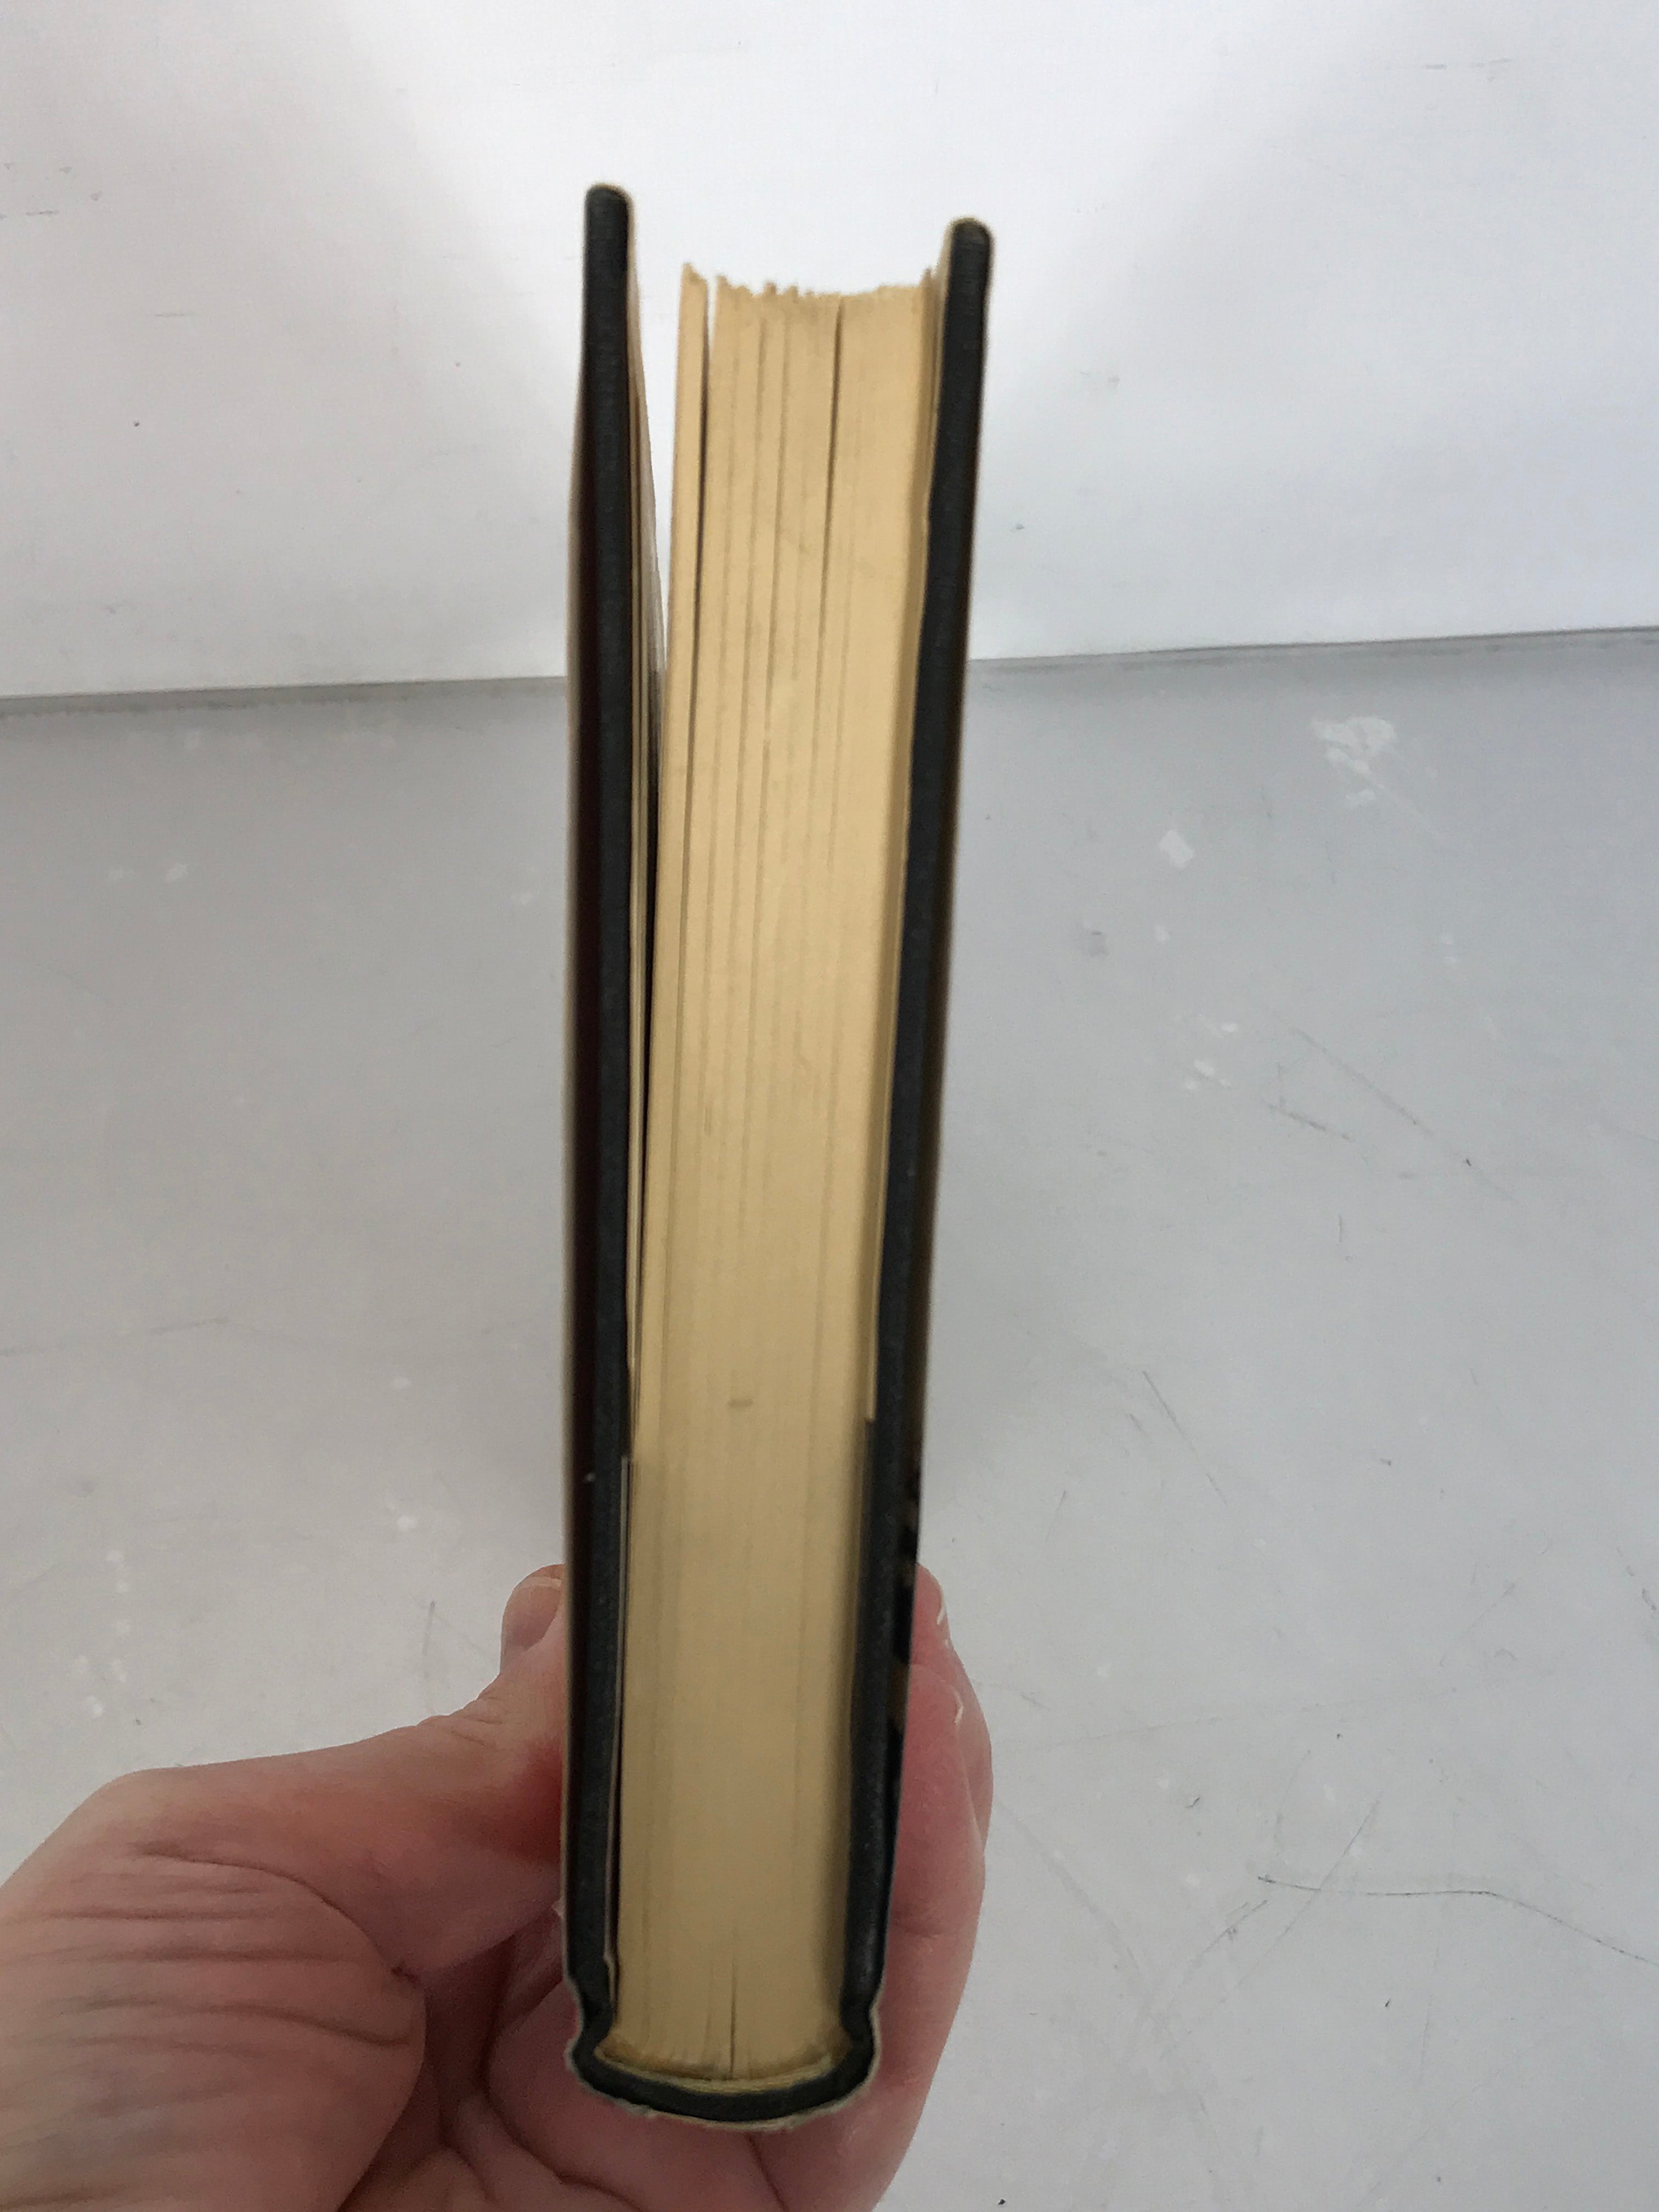 The Gospel in Dispute by Edmund Perry First Edition Signed 1958 HC DJ